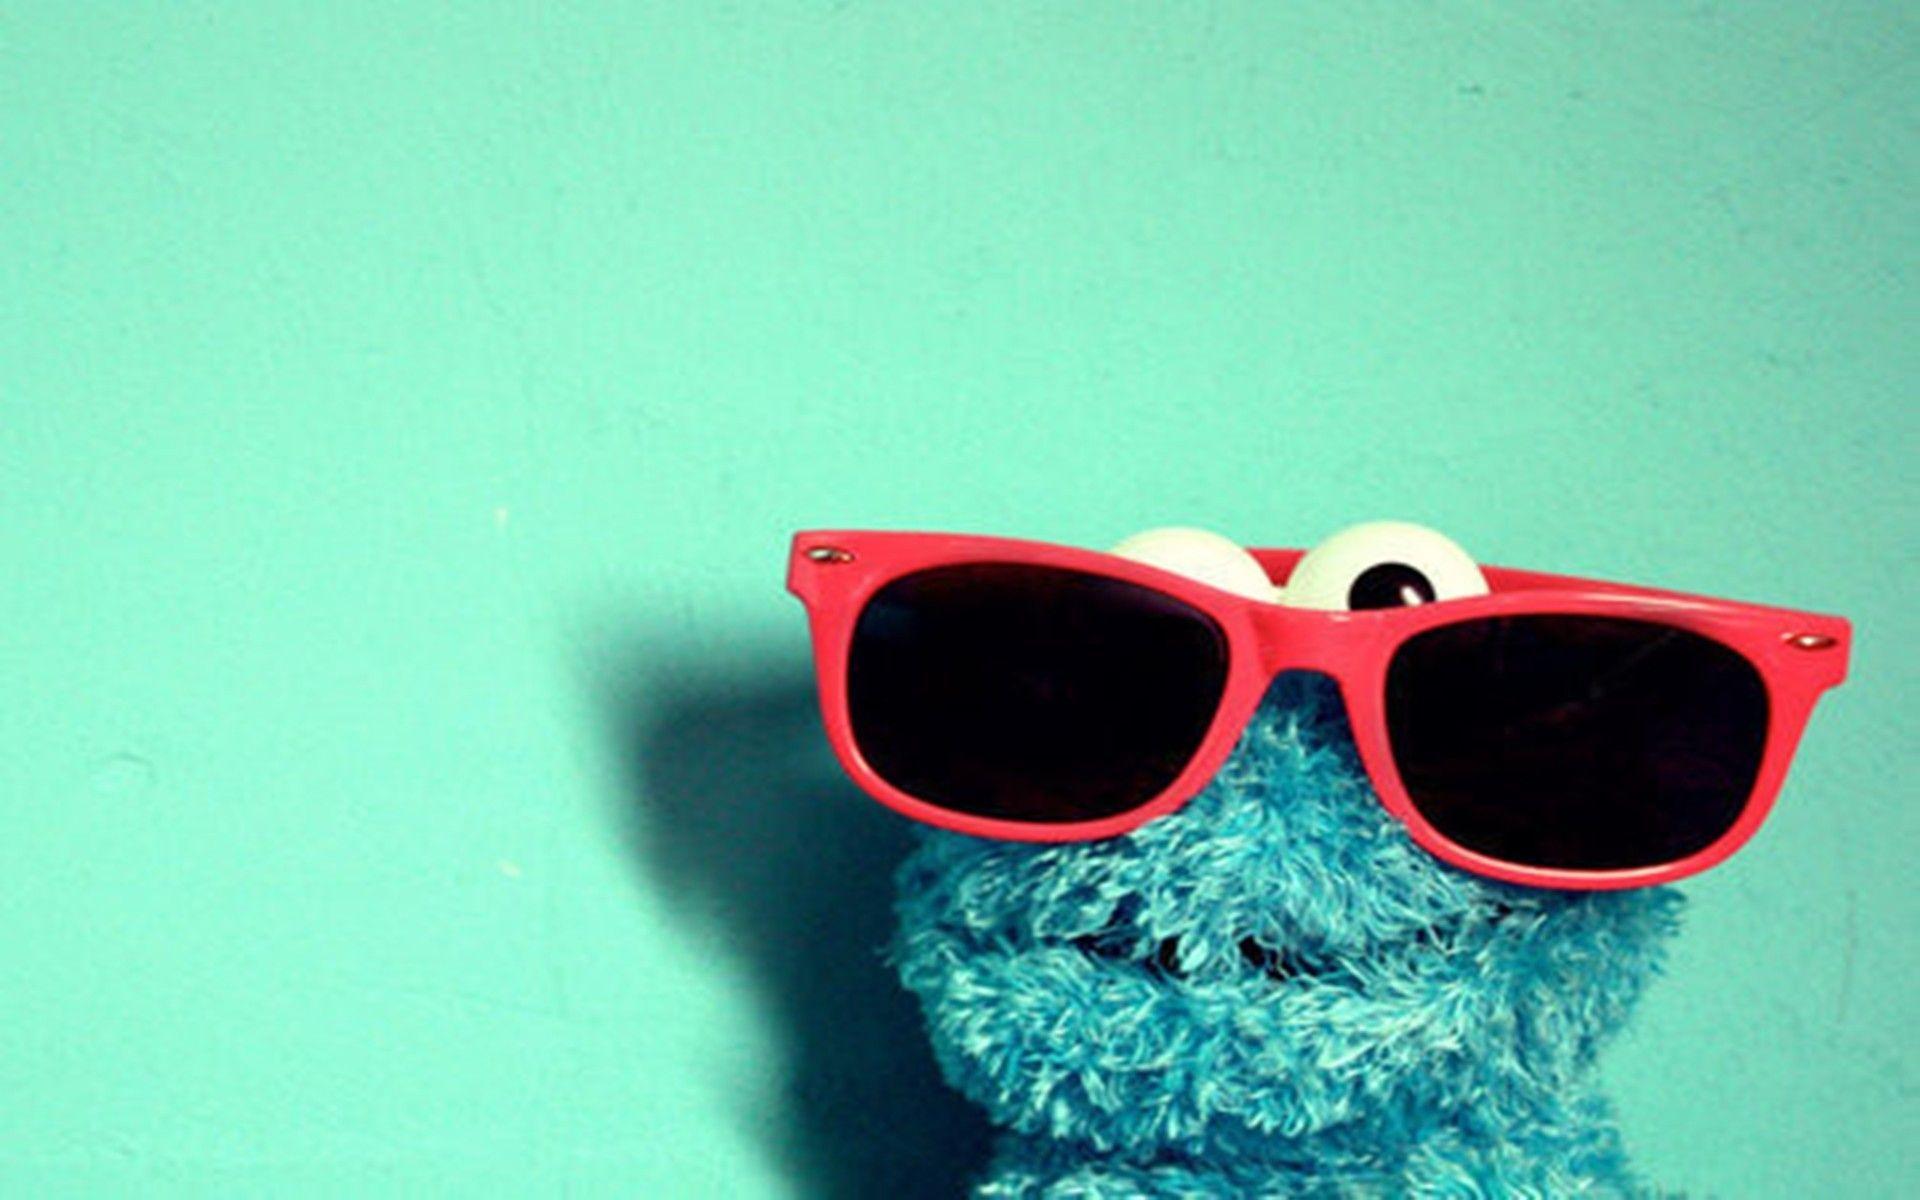 Cookie Monster Background